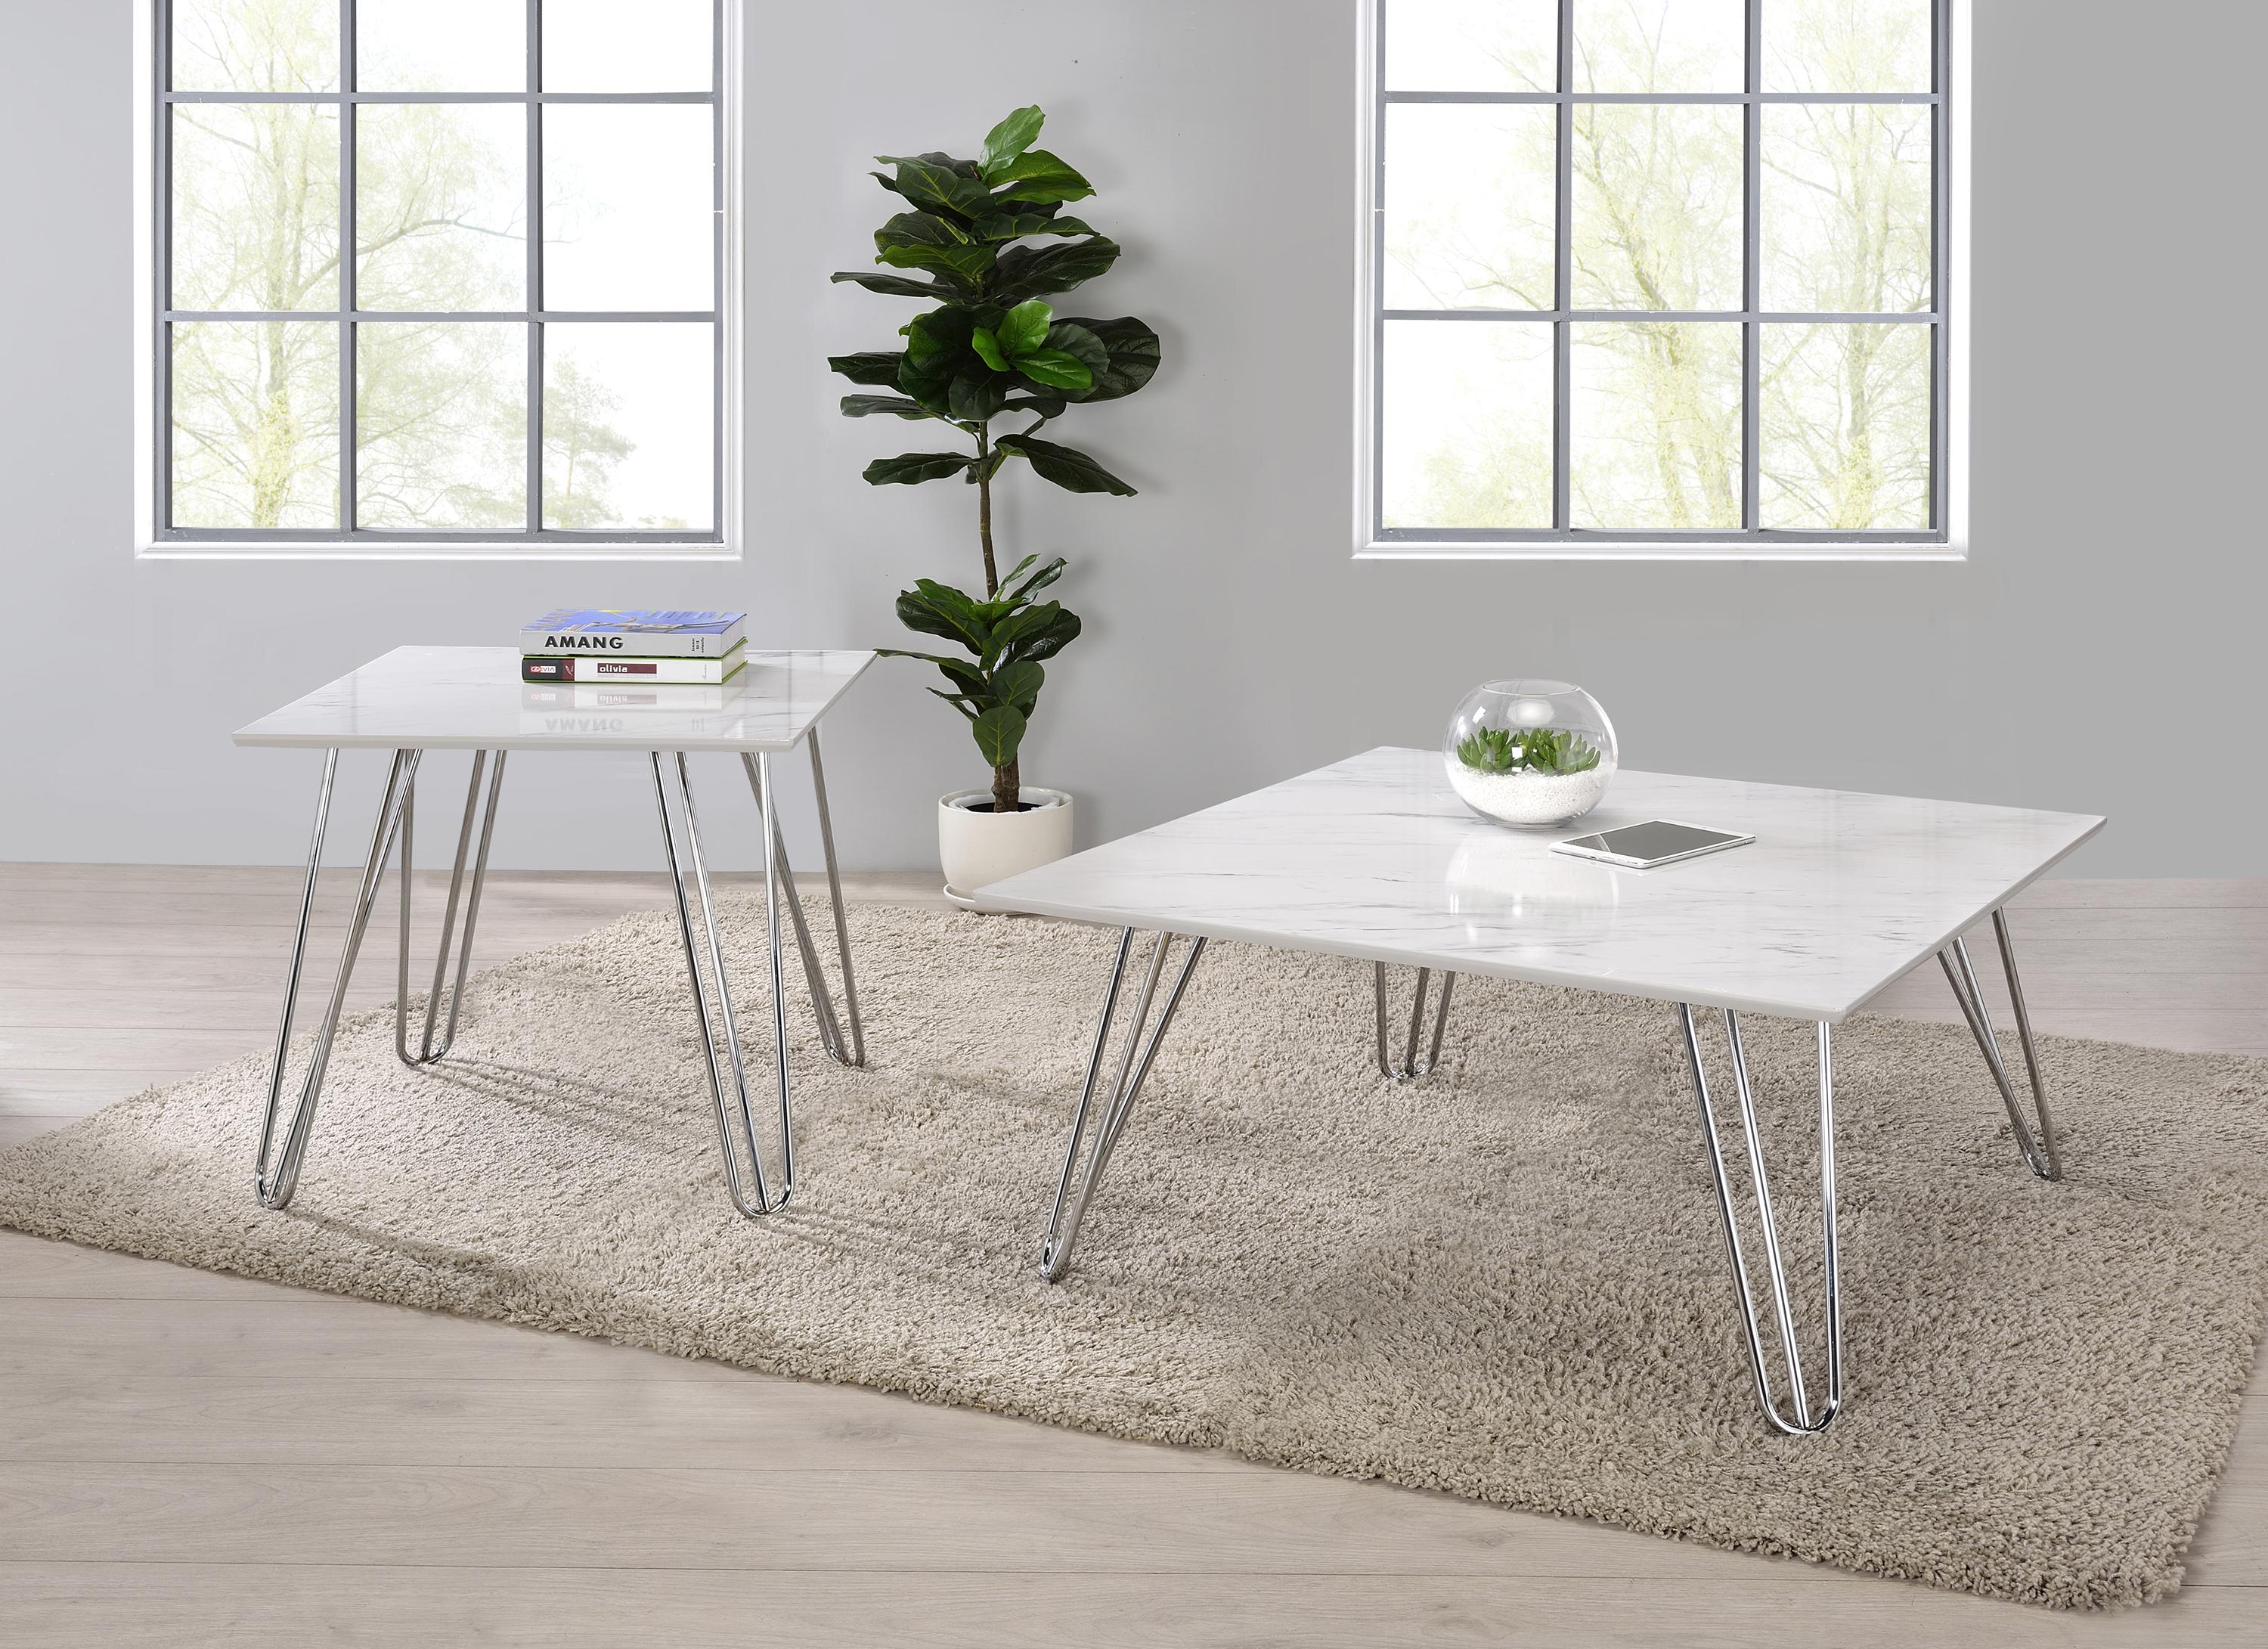 Contemporary Coffee Table Set 724288-S2 724288-S2 in Chrome, White 